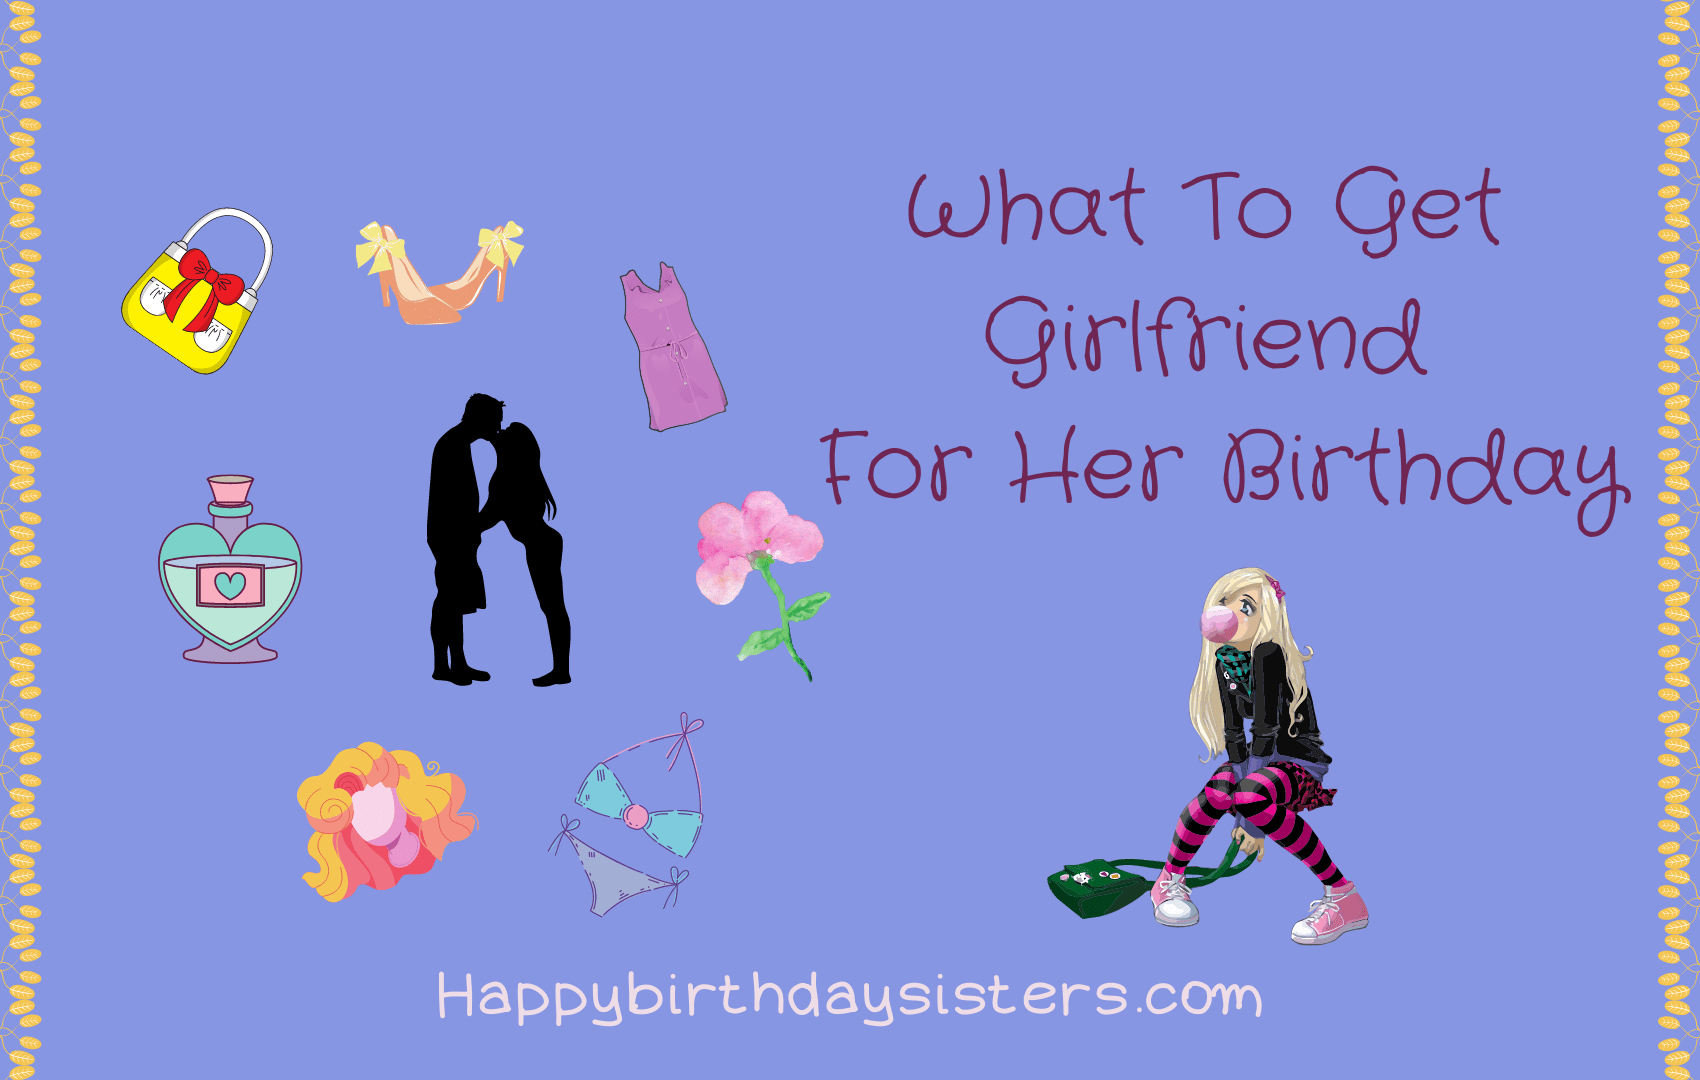 What To Get Girlfriend For Her Birthday